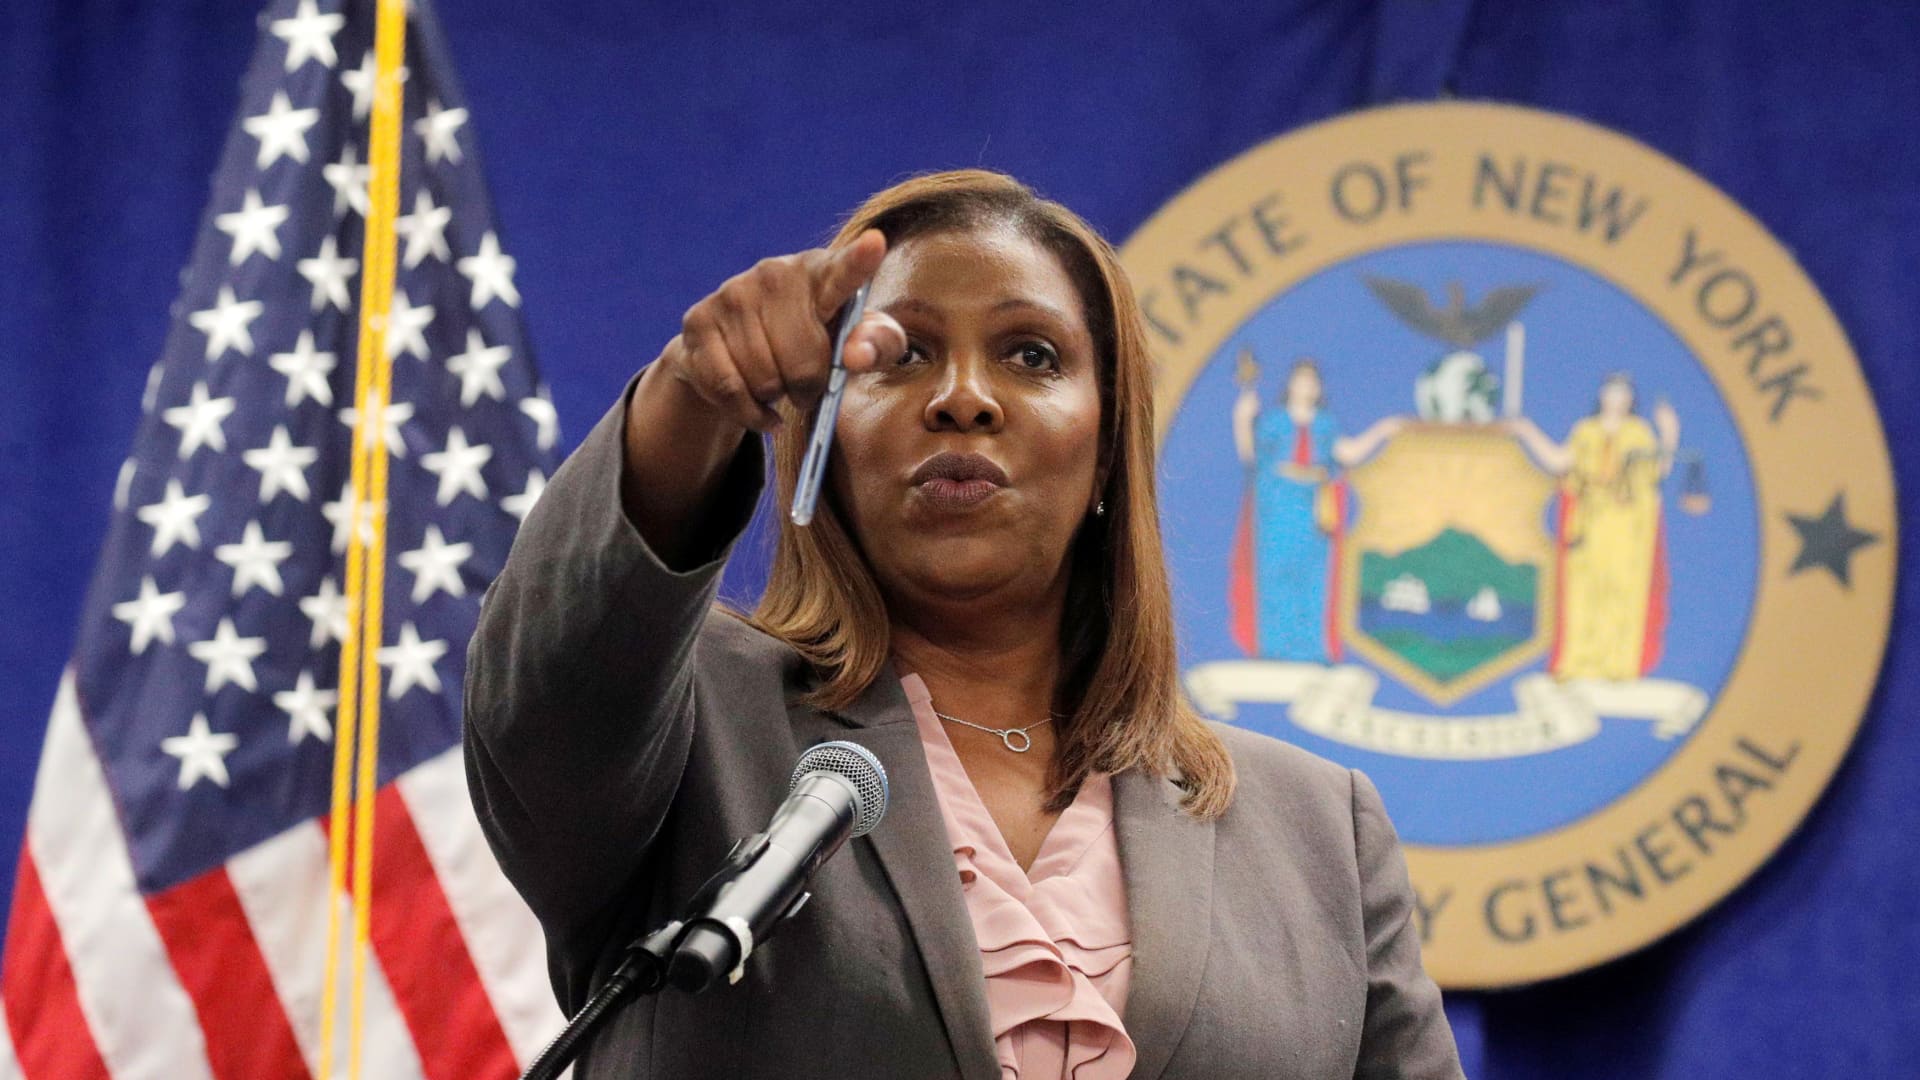 New York State Attorney General, Letitia James, speaks during a news conference, to announce criminal justice reform in New York City, U.S., May 21, 2021.